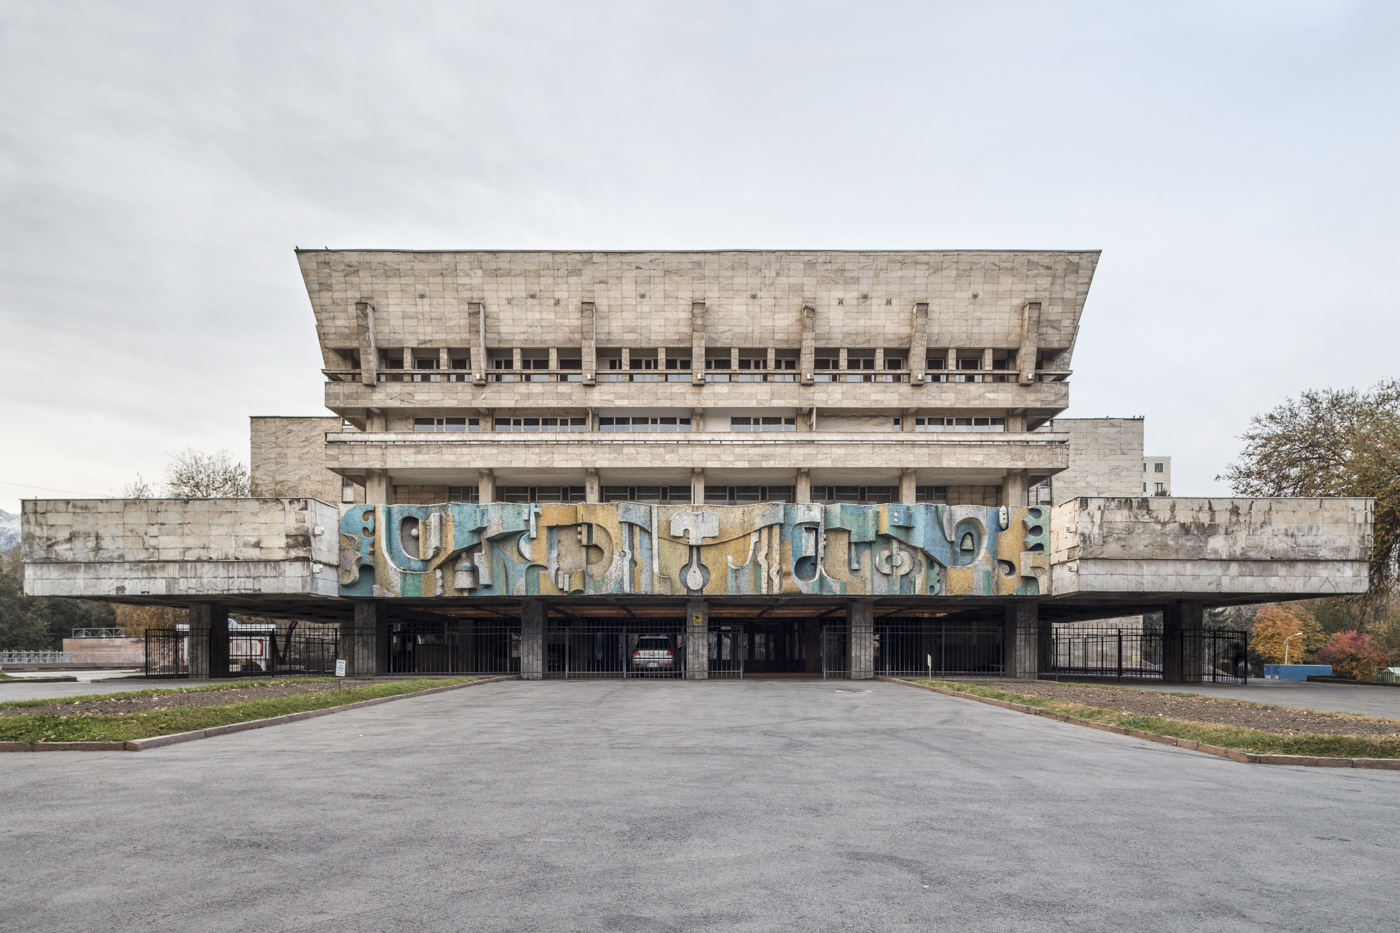 State Academic Russian Theatre for children and young people (former Palace of Culture AHBK) (1981). Almaty, Kazakhstan. Photo: Roberto Conte